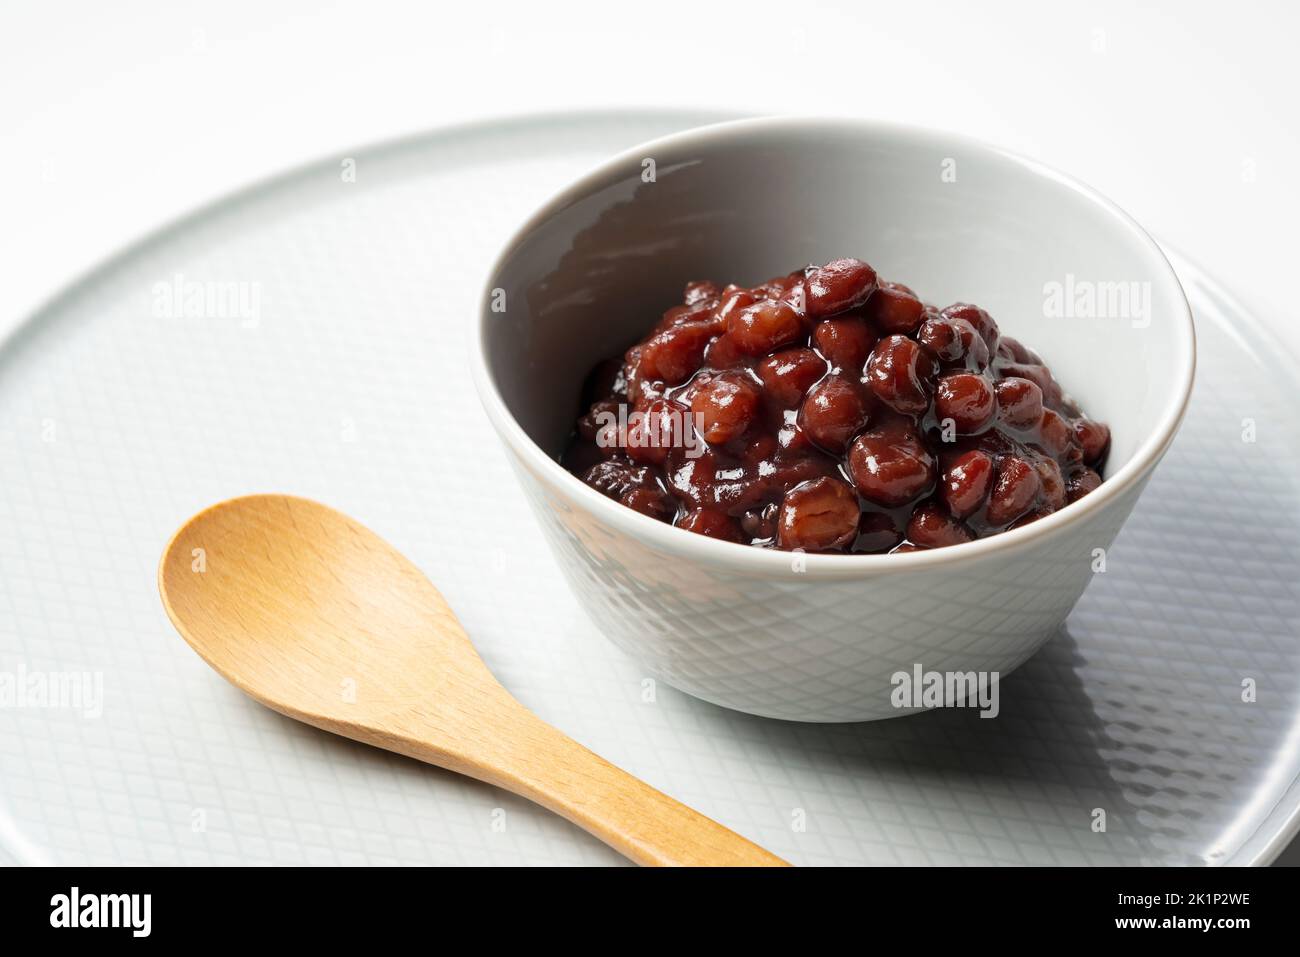 Boiled azuki beans in a small bowl placed against a white background. Stock Photo